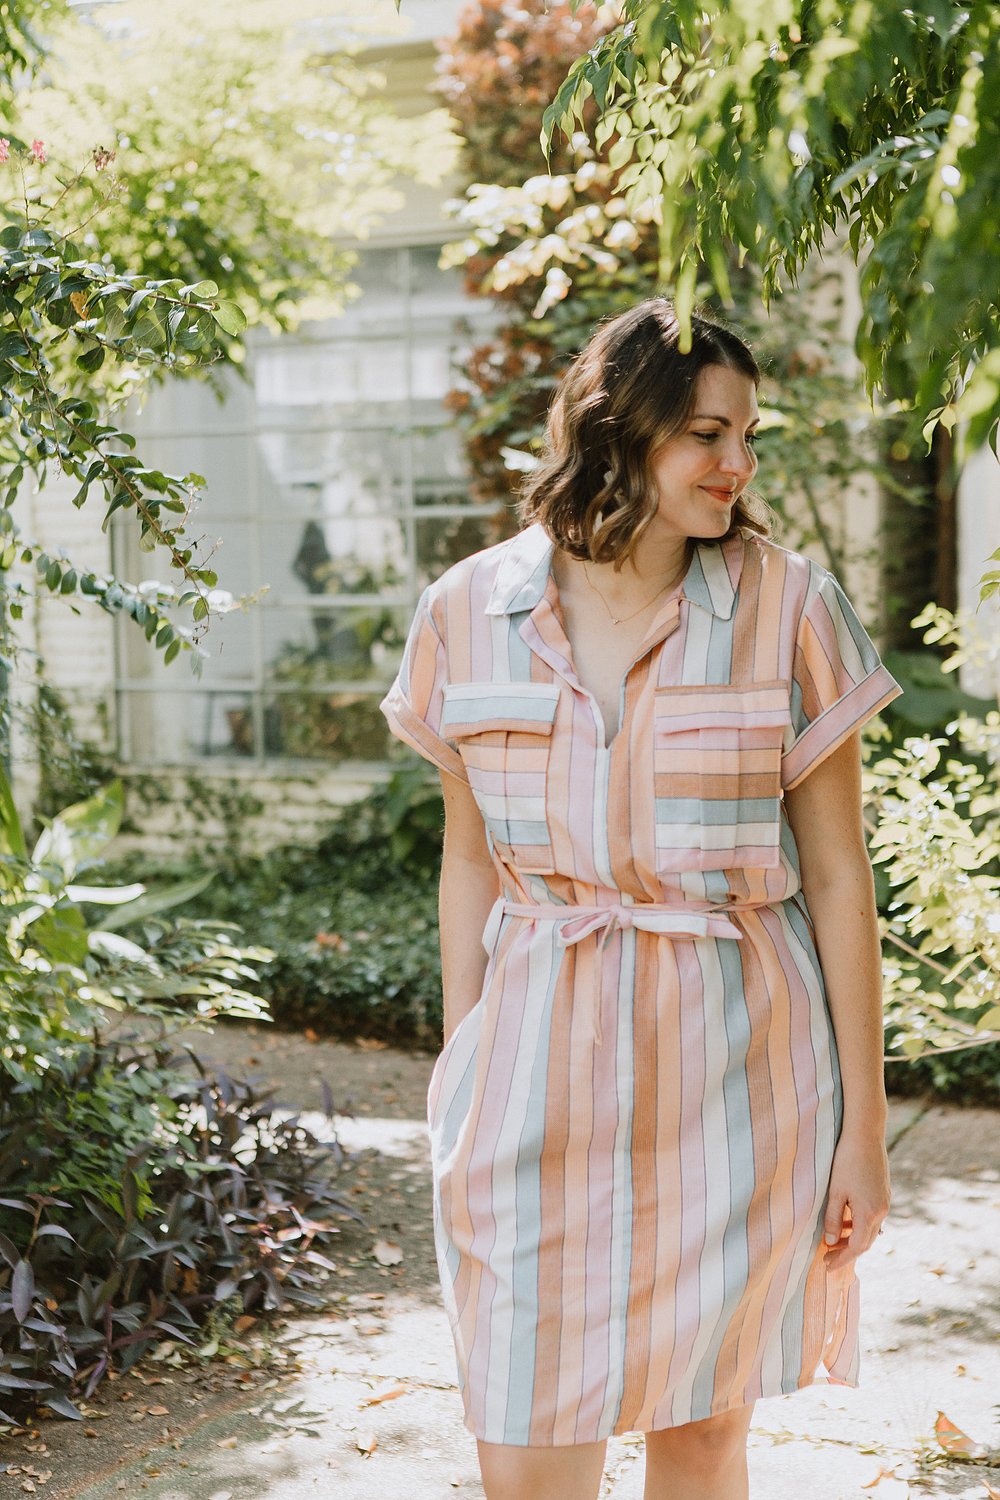 Woman wearing the Sydni Shirt-Dress sewing pattern from Sew To Grow on The Fold Line. A dress pattern made in linen, lawn, medium weight cotton, chambray, gauze, voile, or rayon fabrics, featuring a collar, V-neck, relaxed fit, knee length, front pleated 